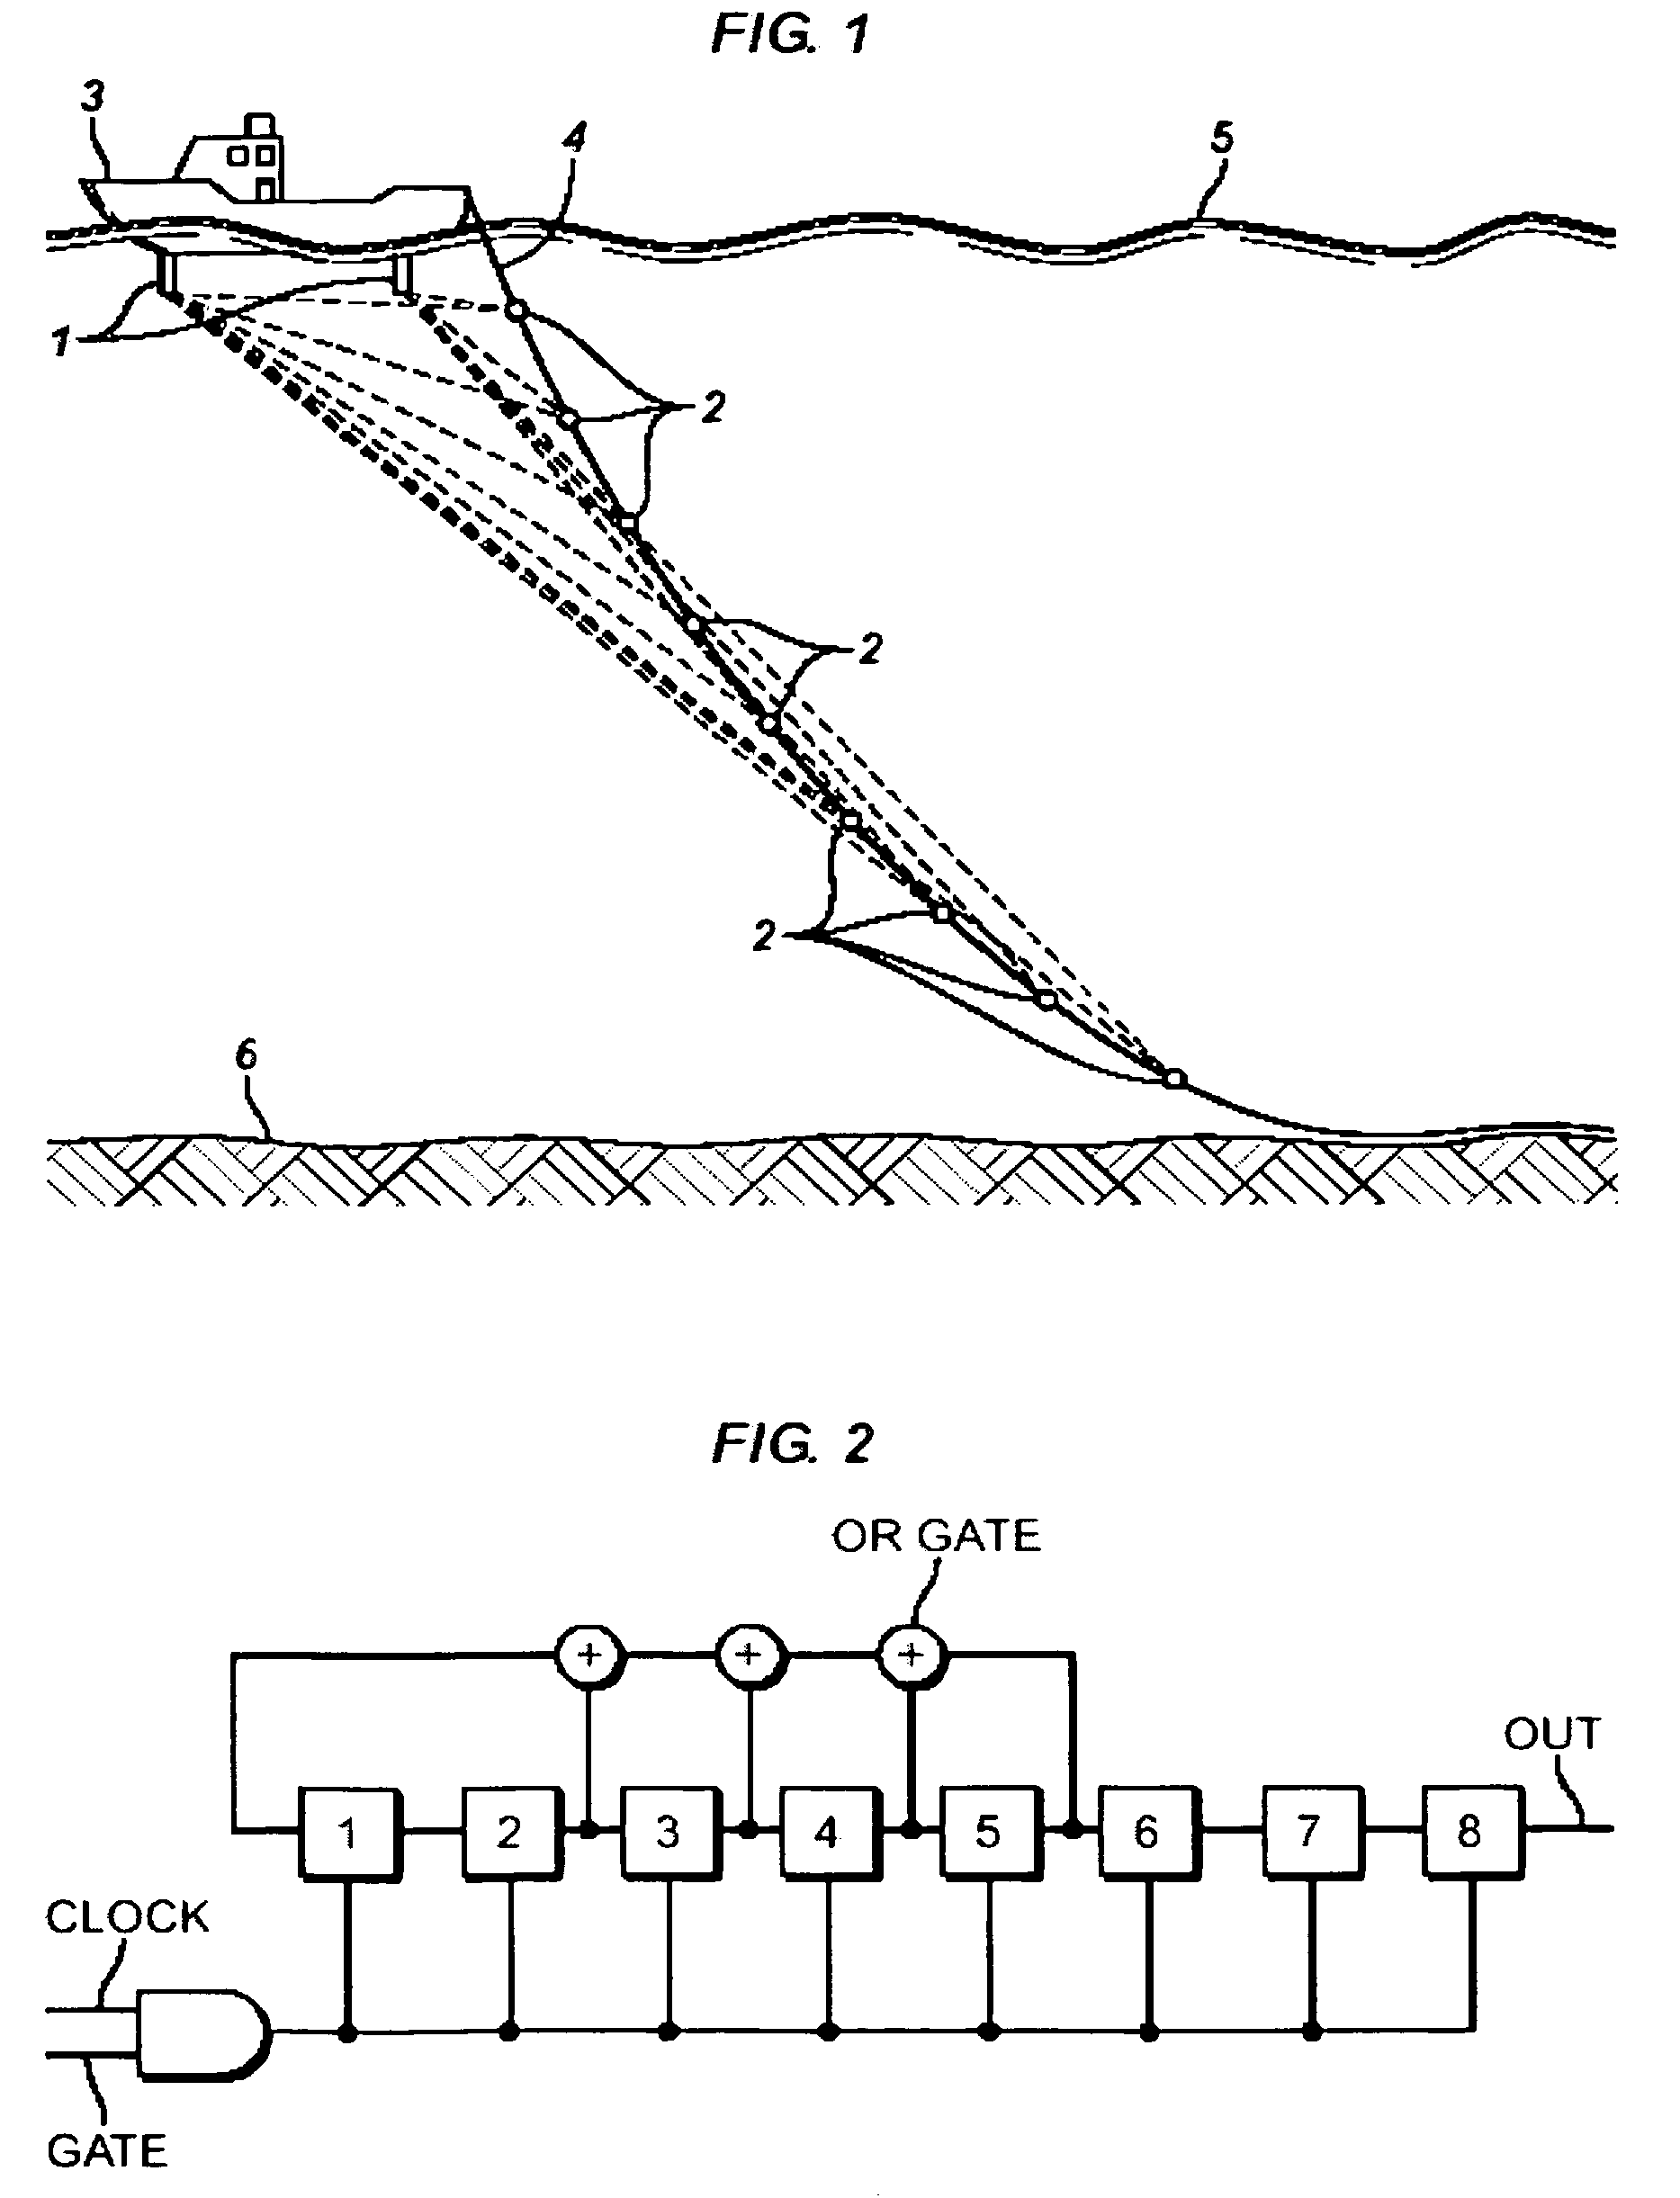 Apparatus, systems and methods for determining position of marine seismic acoustic receivers